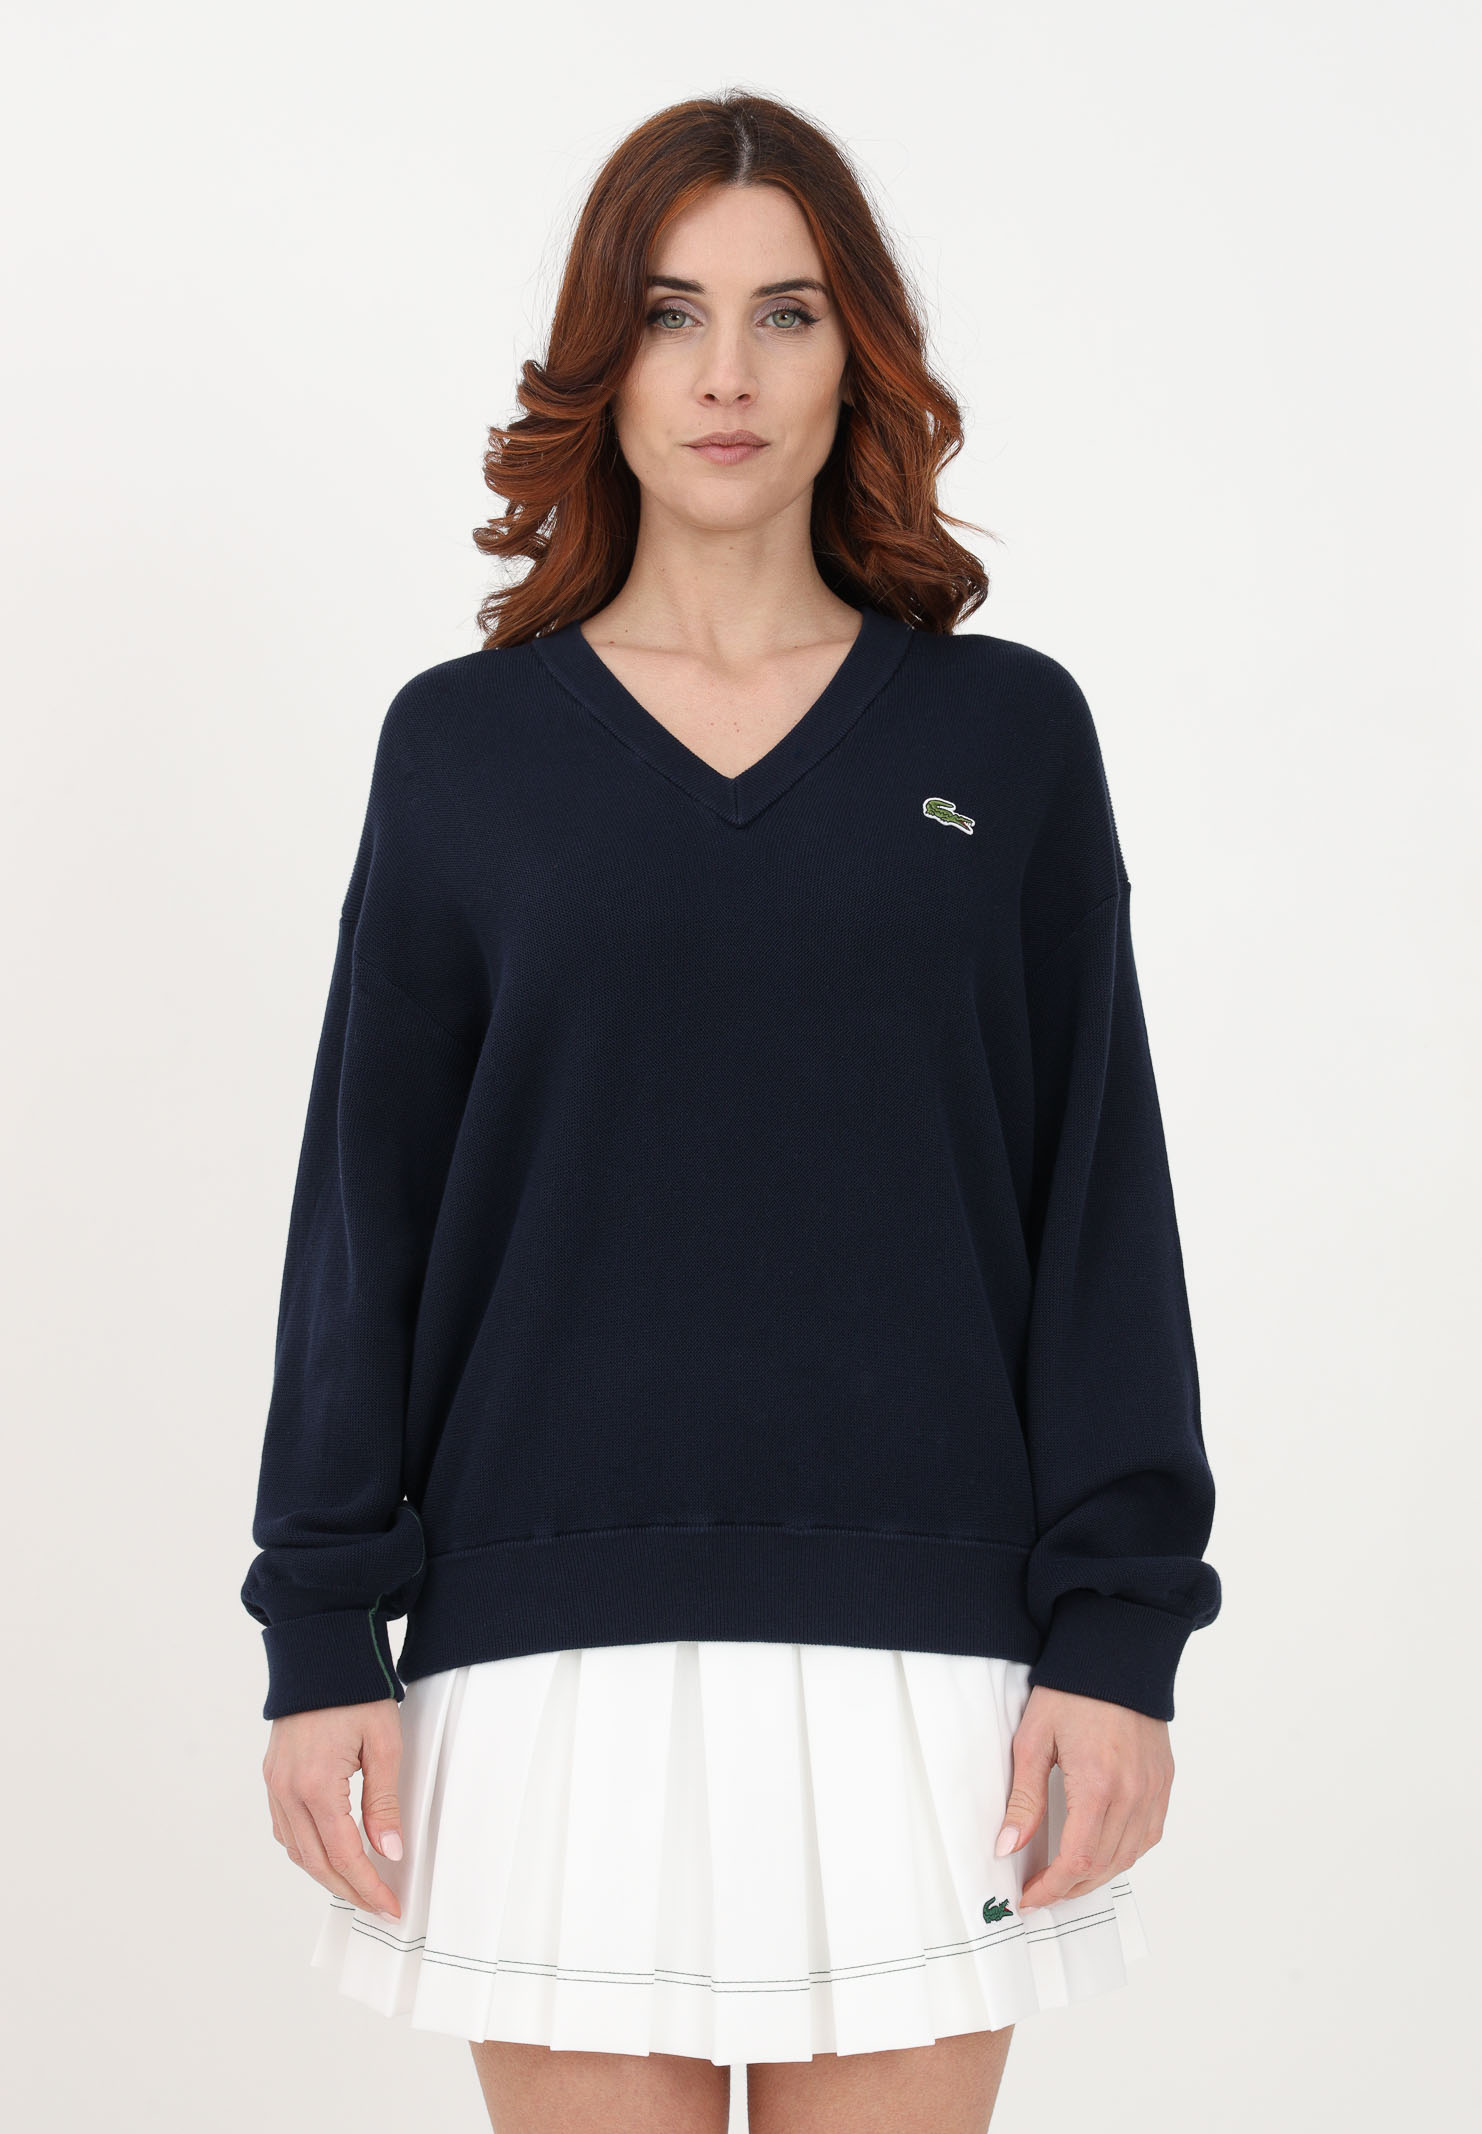 Women's blue long-sleeved sweater with crocodile patch LACOSTE | AF5622166